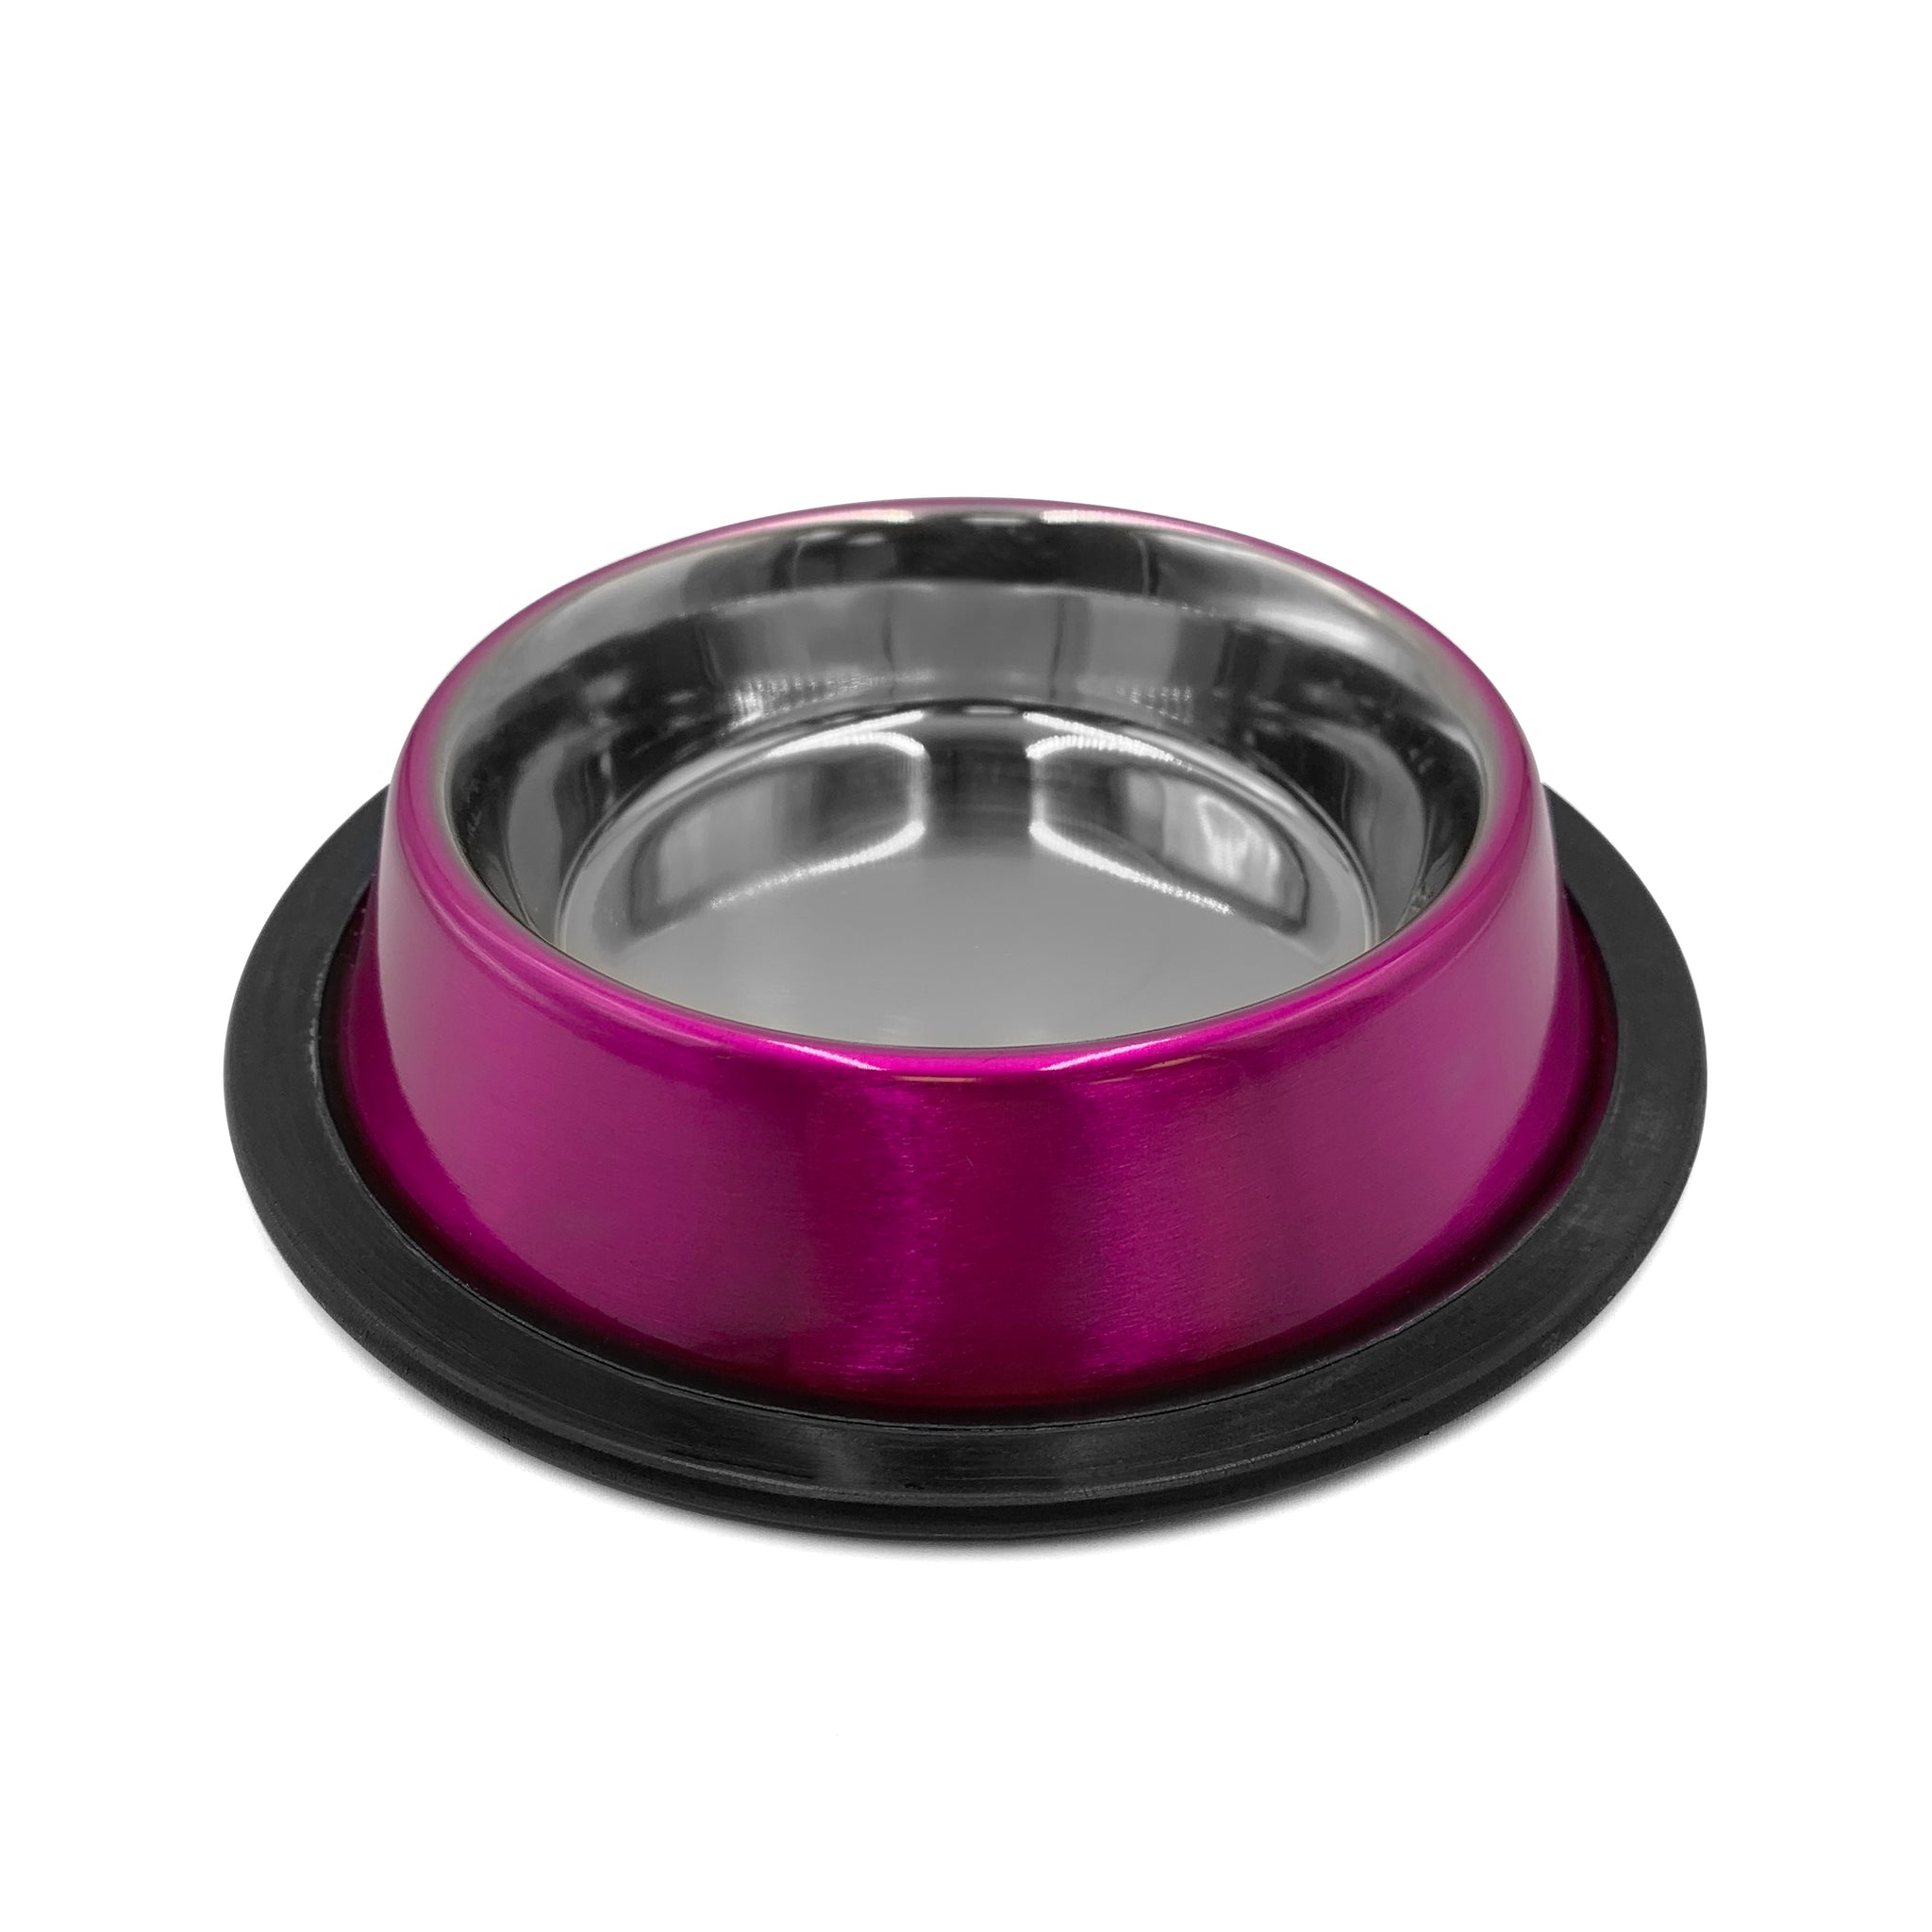 STAINLESS STEEL, ANTI-SKID DOG BOWL LILAC